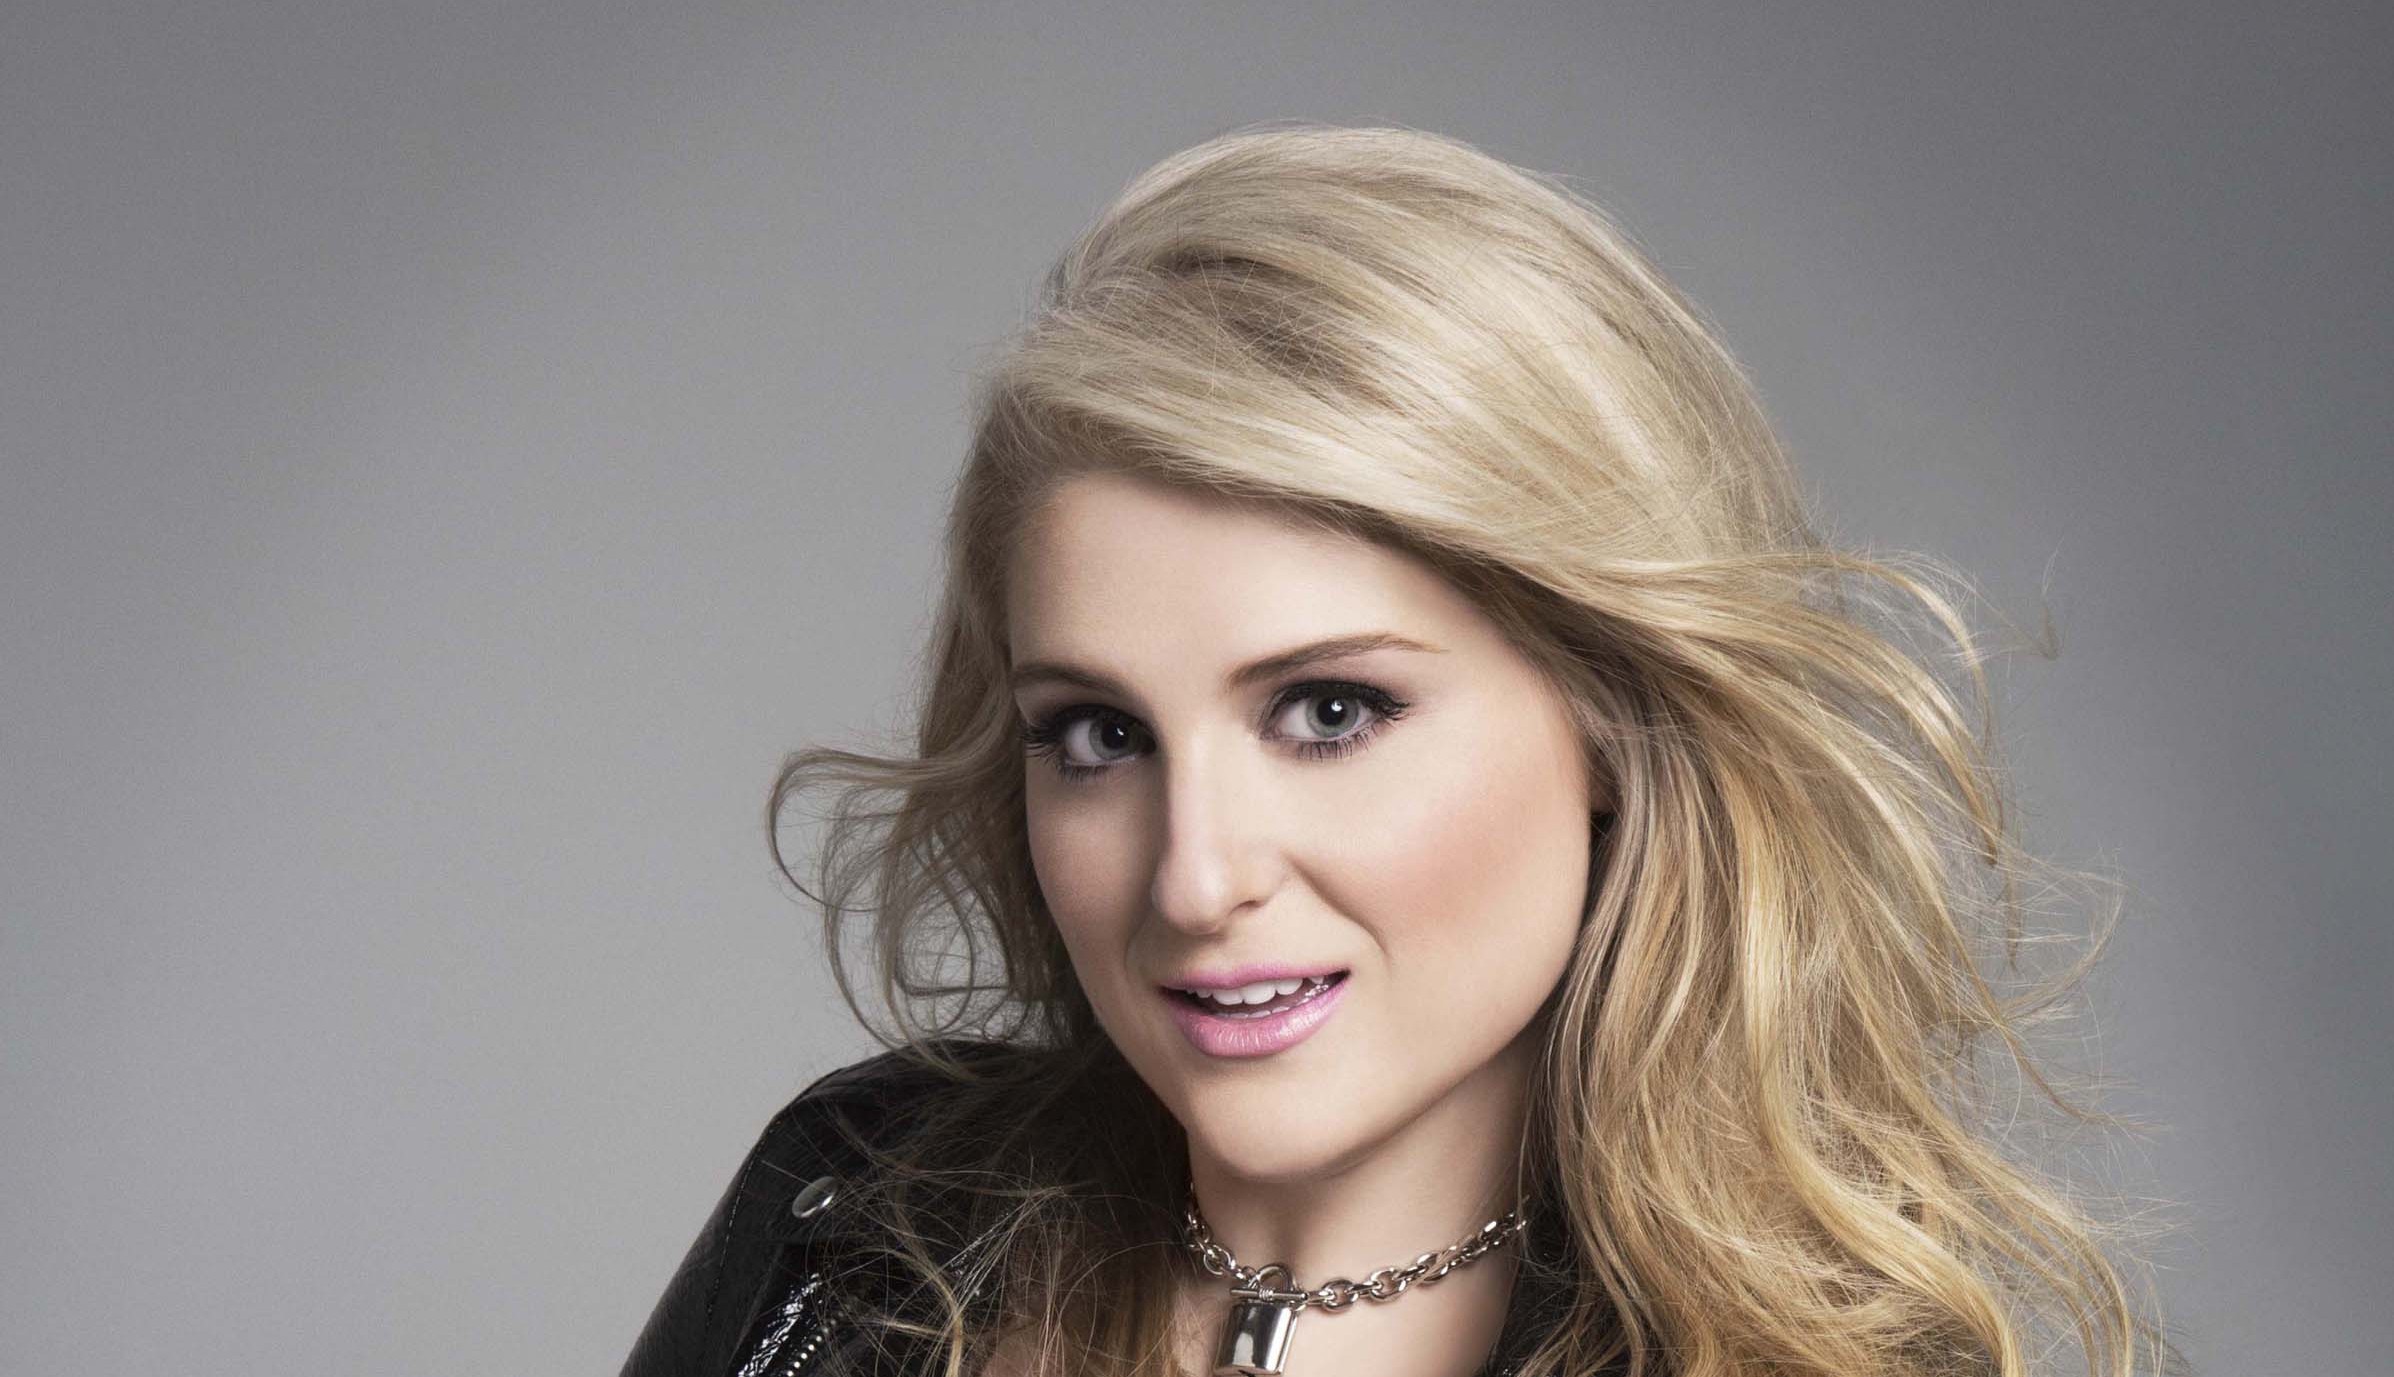 Meet Meghan Trainor, Singer of 'All About That Bass' - ABC News